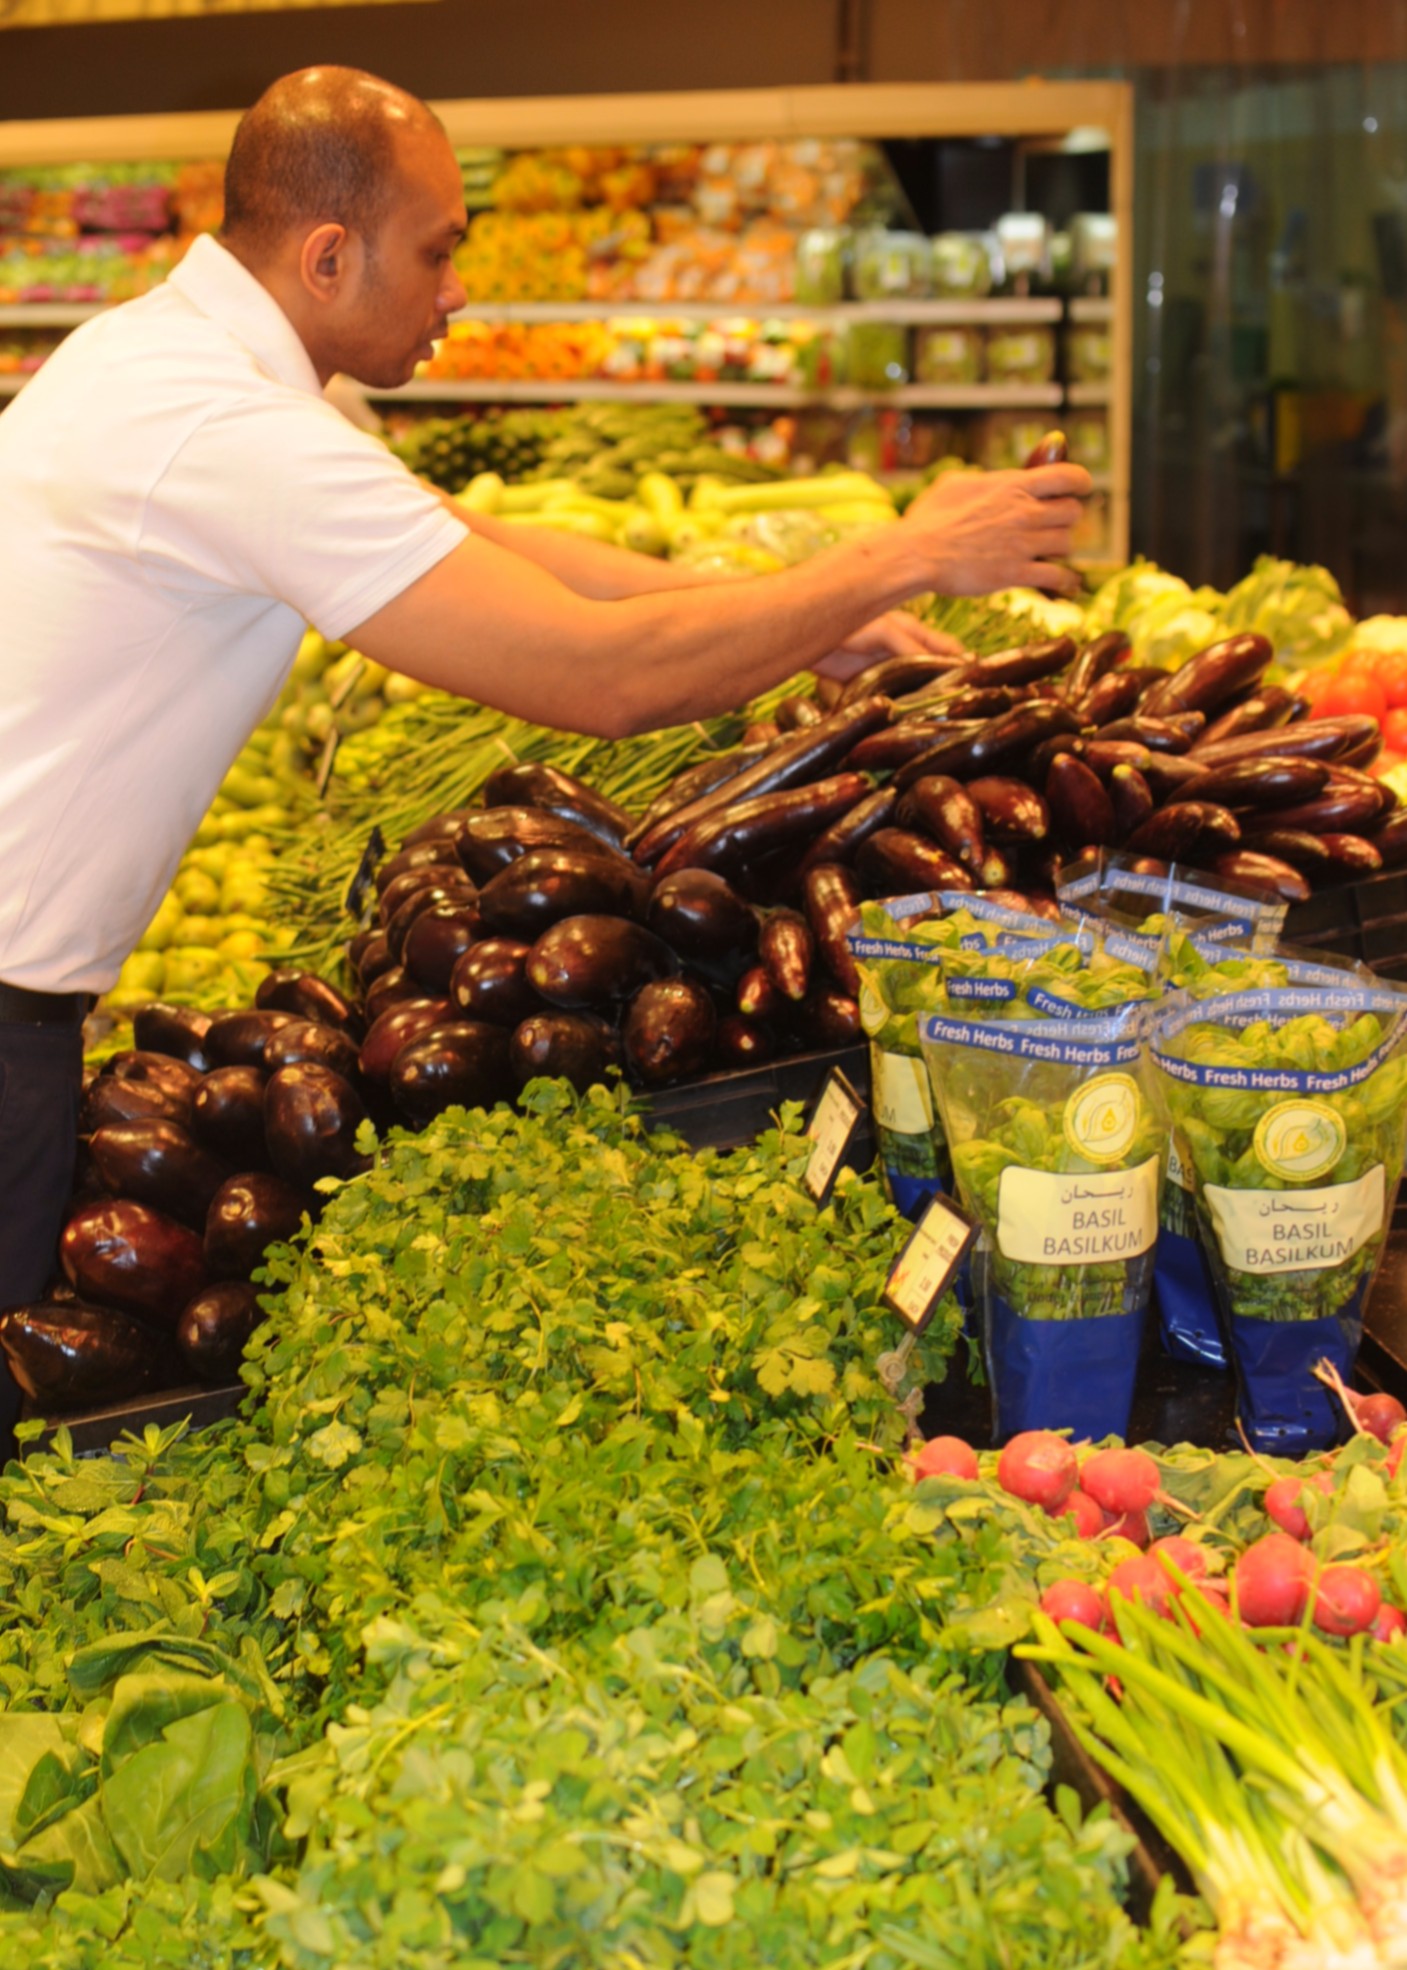 Spinneys, the Premier Supermarket Retailer in the Middle East, Joins GLOBALG.A.P. as a Member.